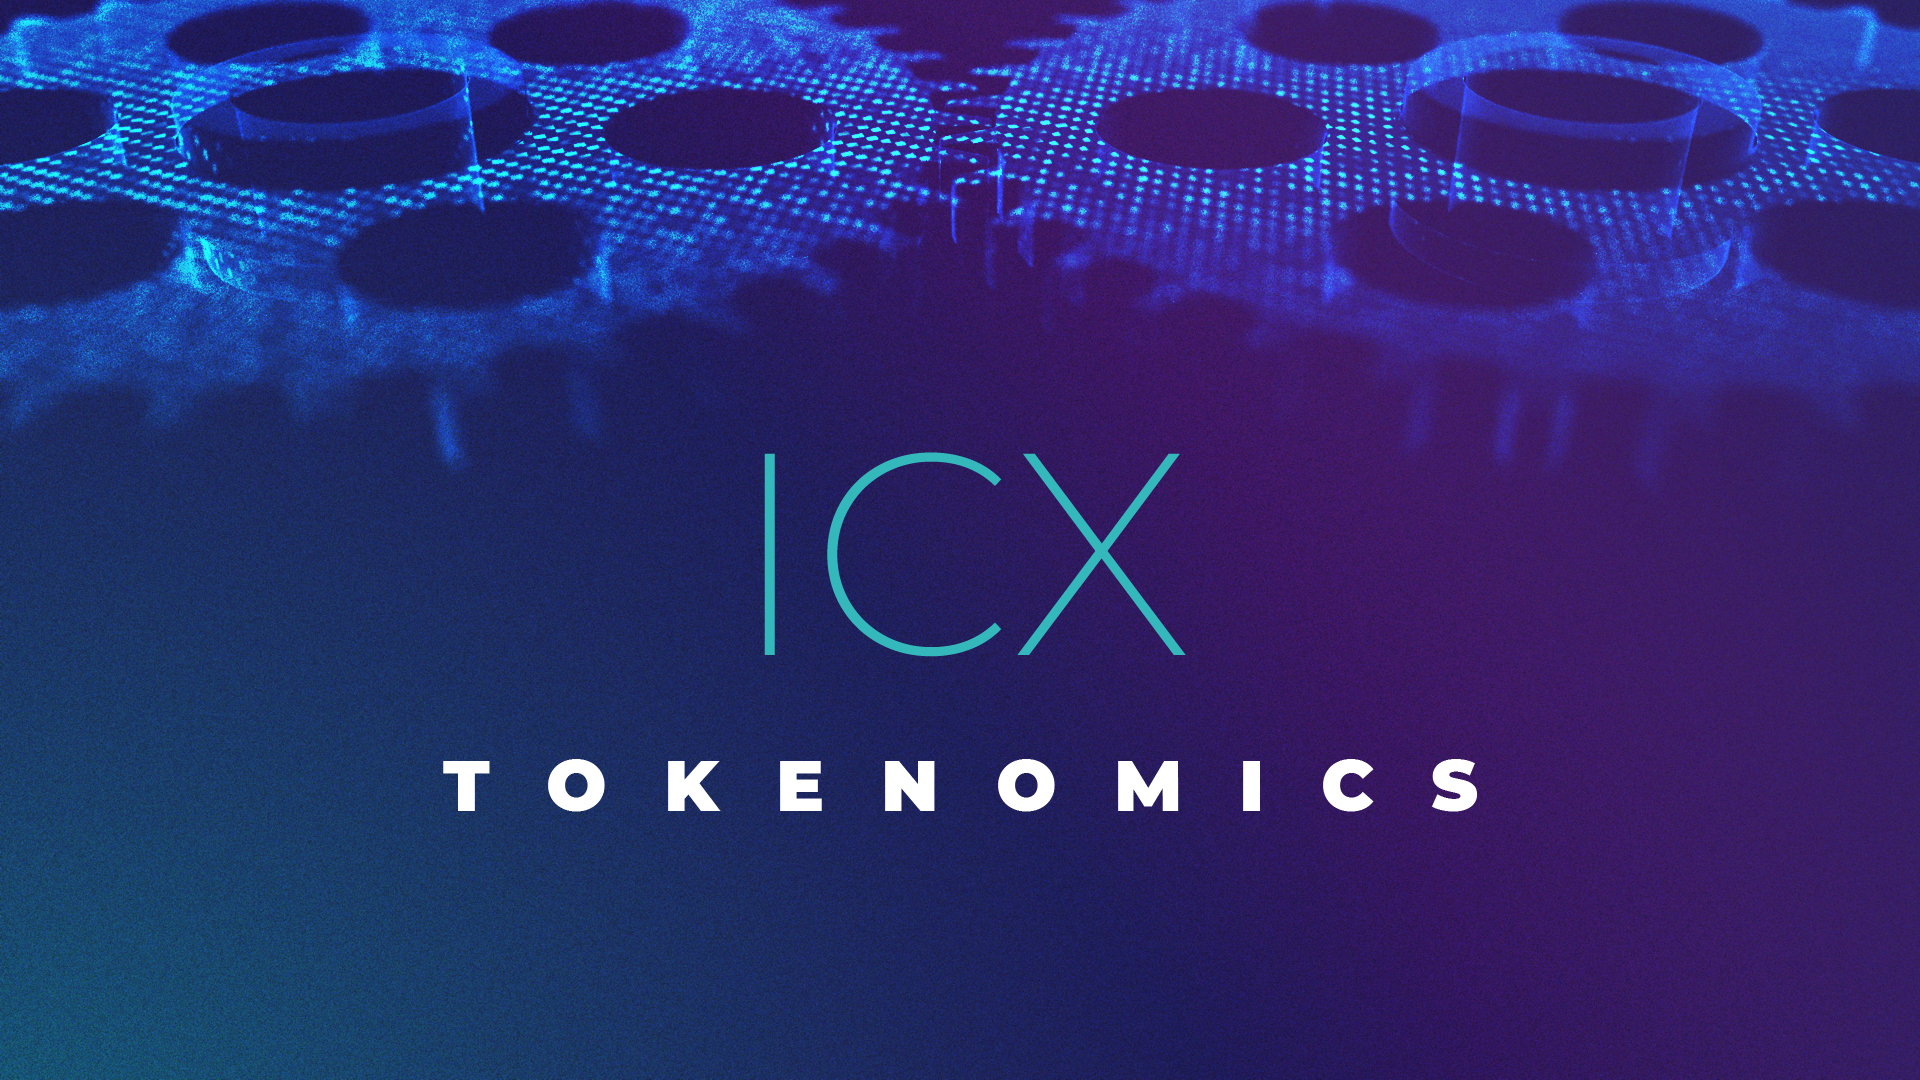 ICON tokenomics have been improved with IISS 3.1. Let’s take a look at some of the changes implemented as part of IISS 3.1.